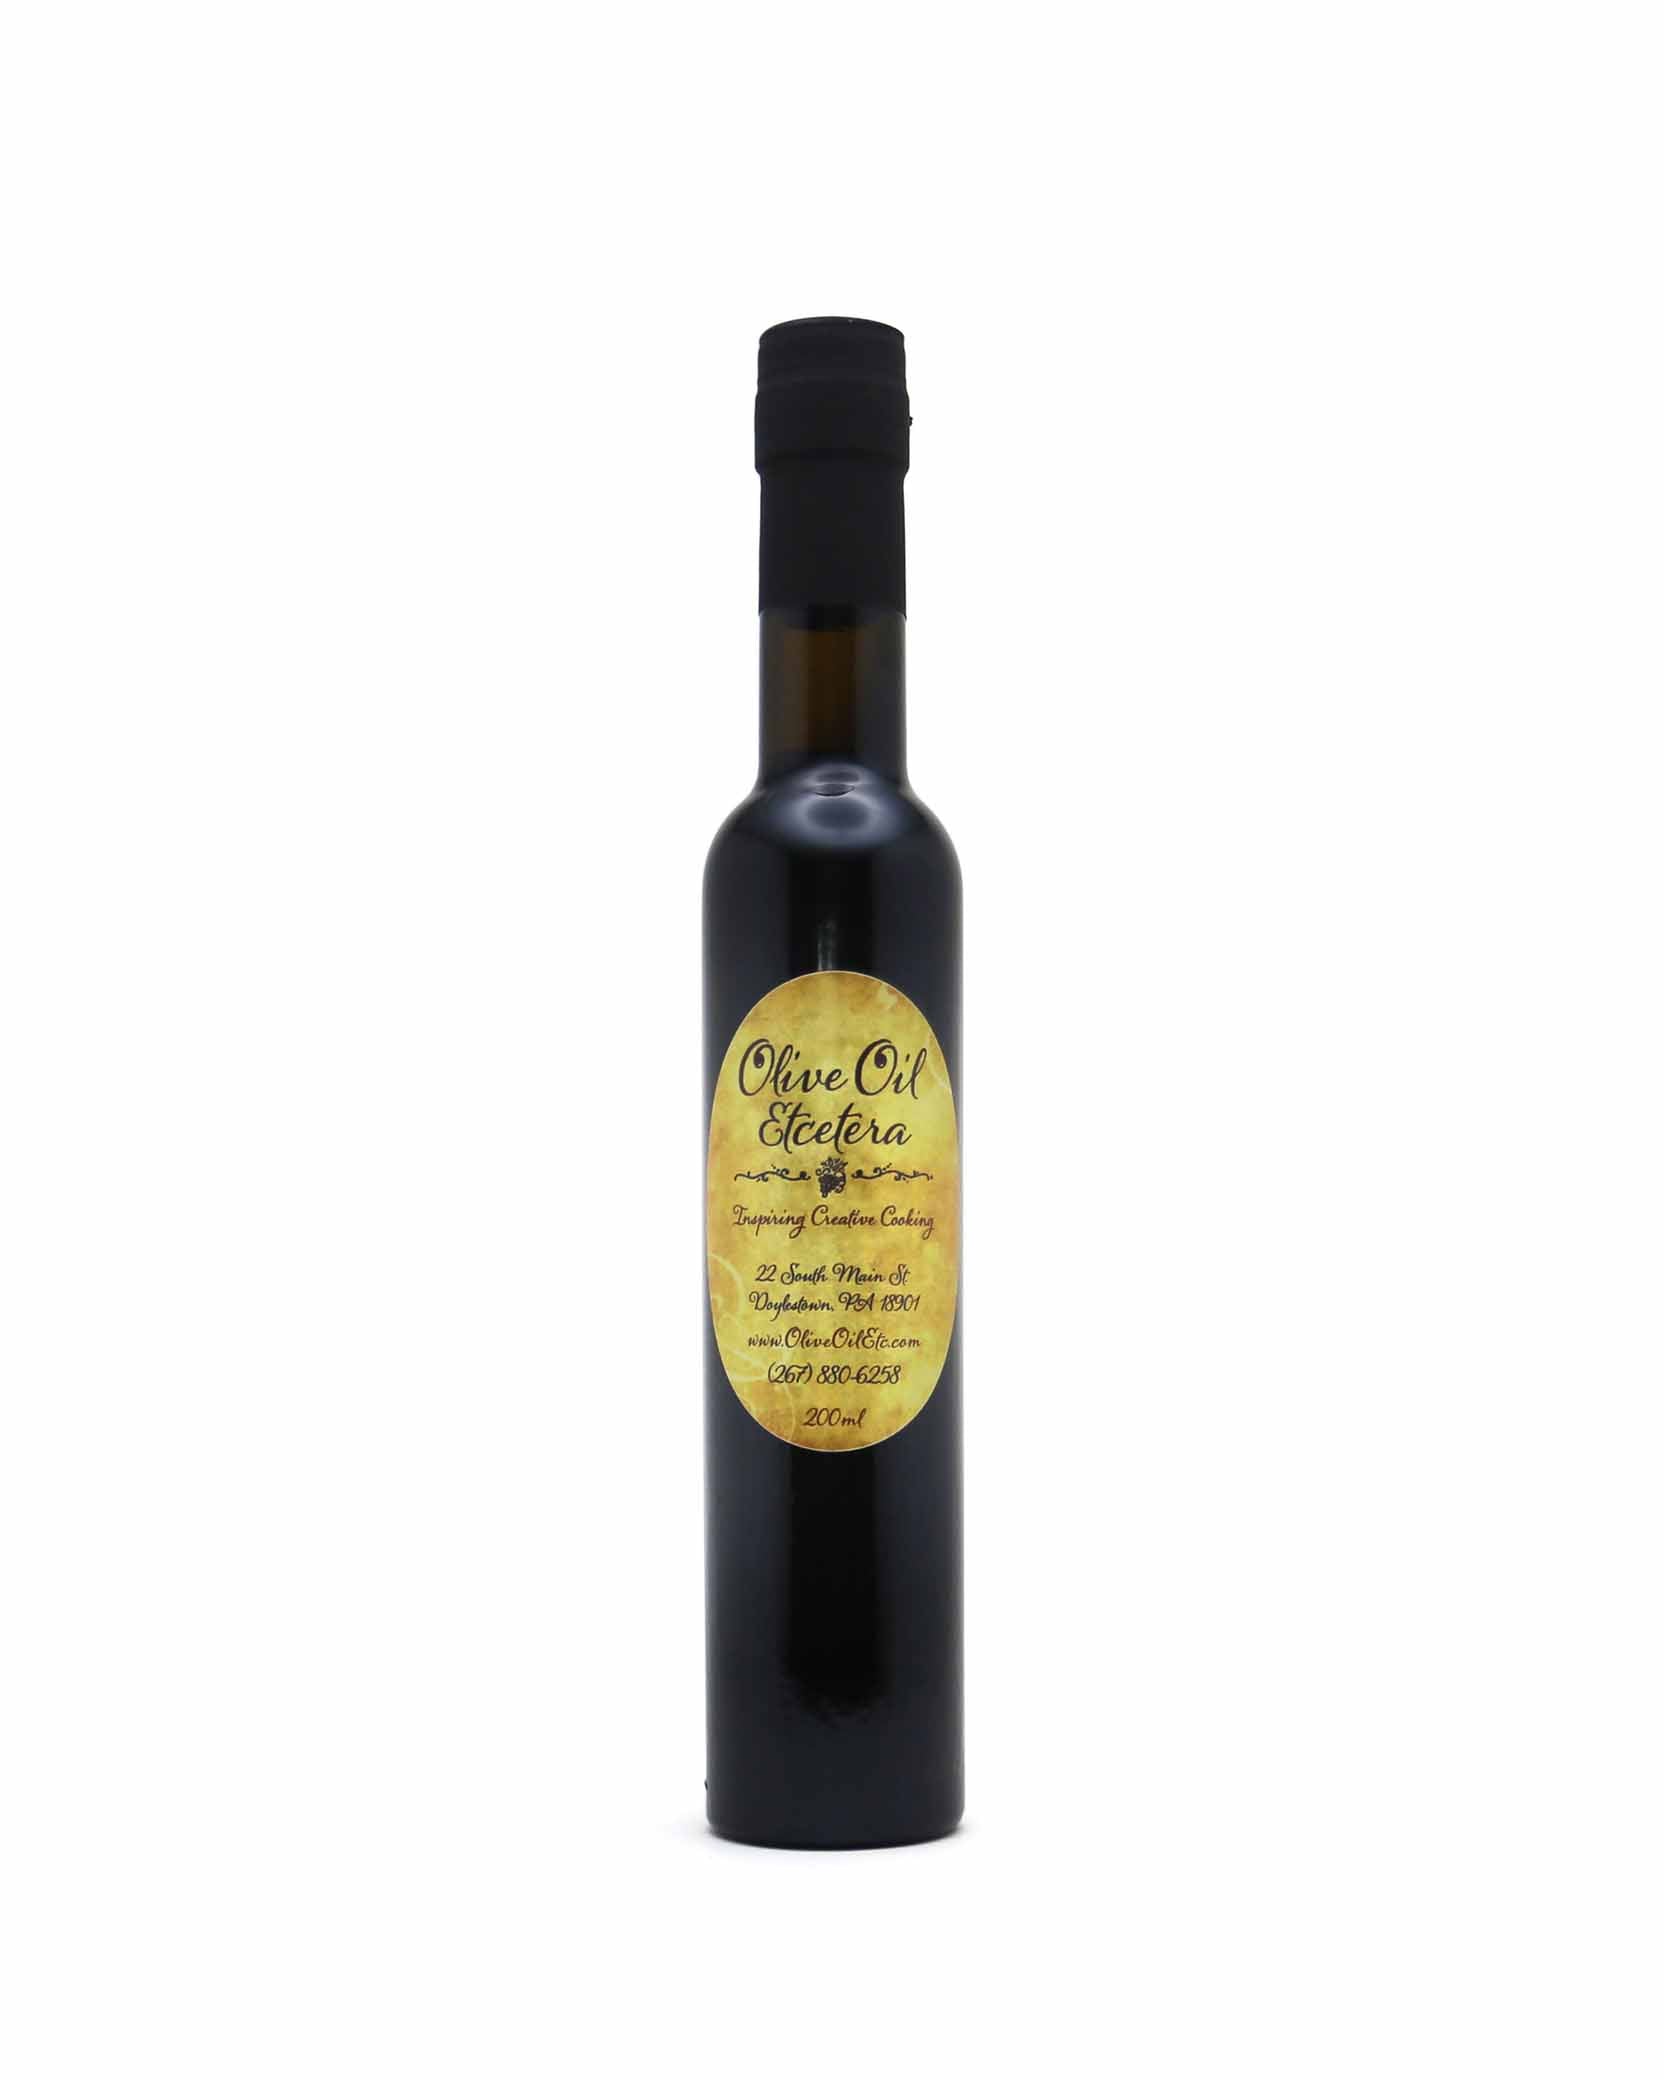 California Lime Olive Oil - Olive Oil Etcetera - Bucks county's gourmet olive oil and vinegar shop